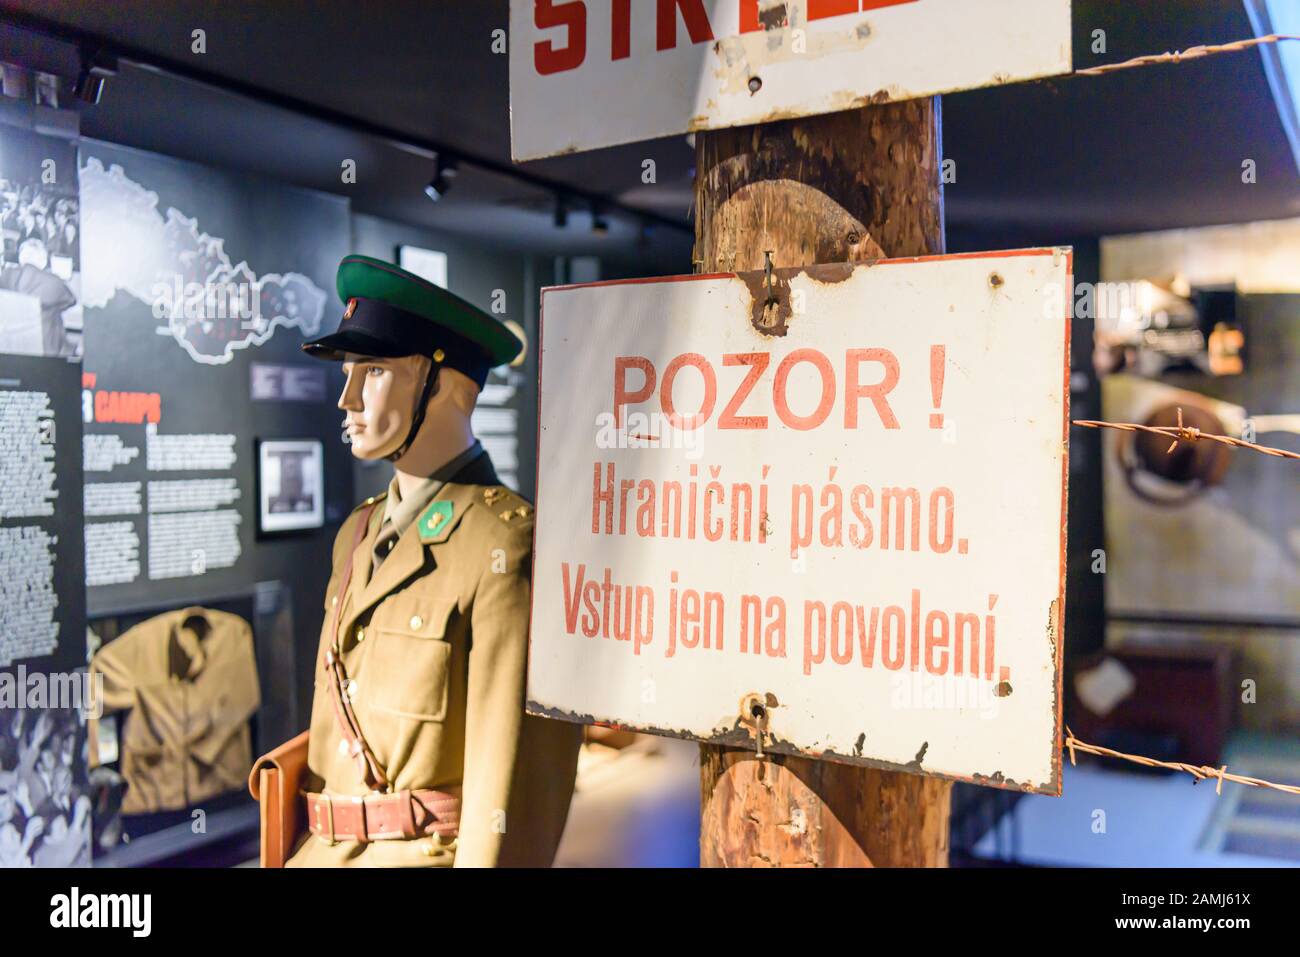 Warning signs in Czech on a barbed wire fence in a museum beside a mannequin wearing a Soviet era military uniform. Stock Photo